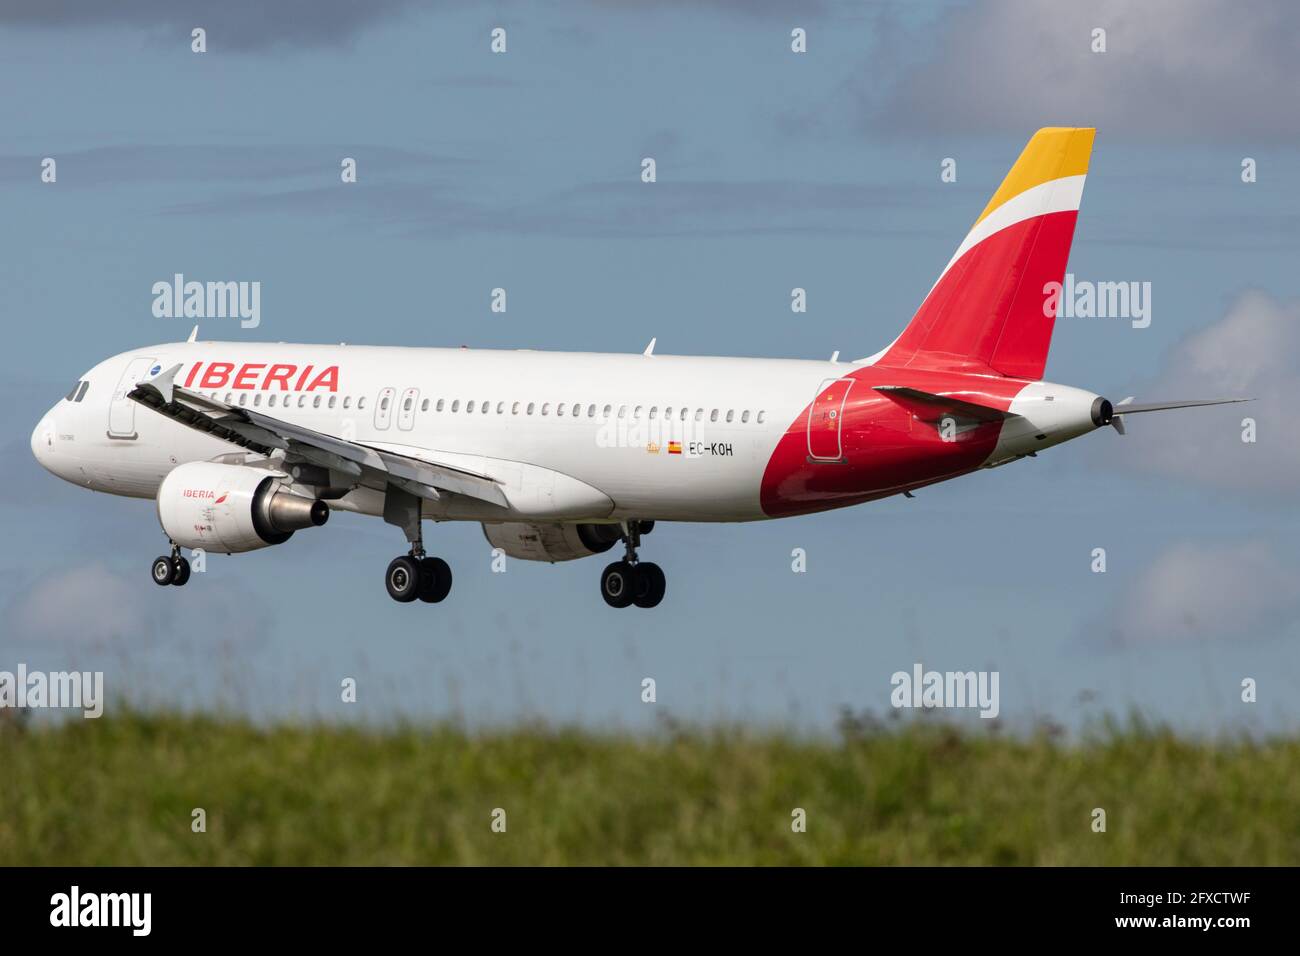 AMSTERDAM, NETHERLANDS - Sep 13, 2020: Iberia (IB / IBE) approaching Amsterdam Schiphol Airport (EHAM/AMS) with an Airbus A320-214 A320 (EC-KOH/2248). Stock Photo